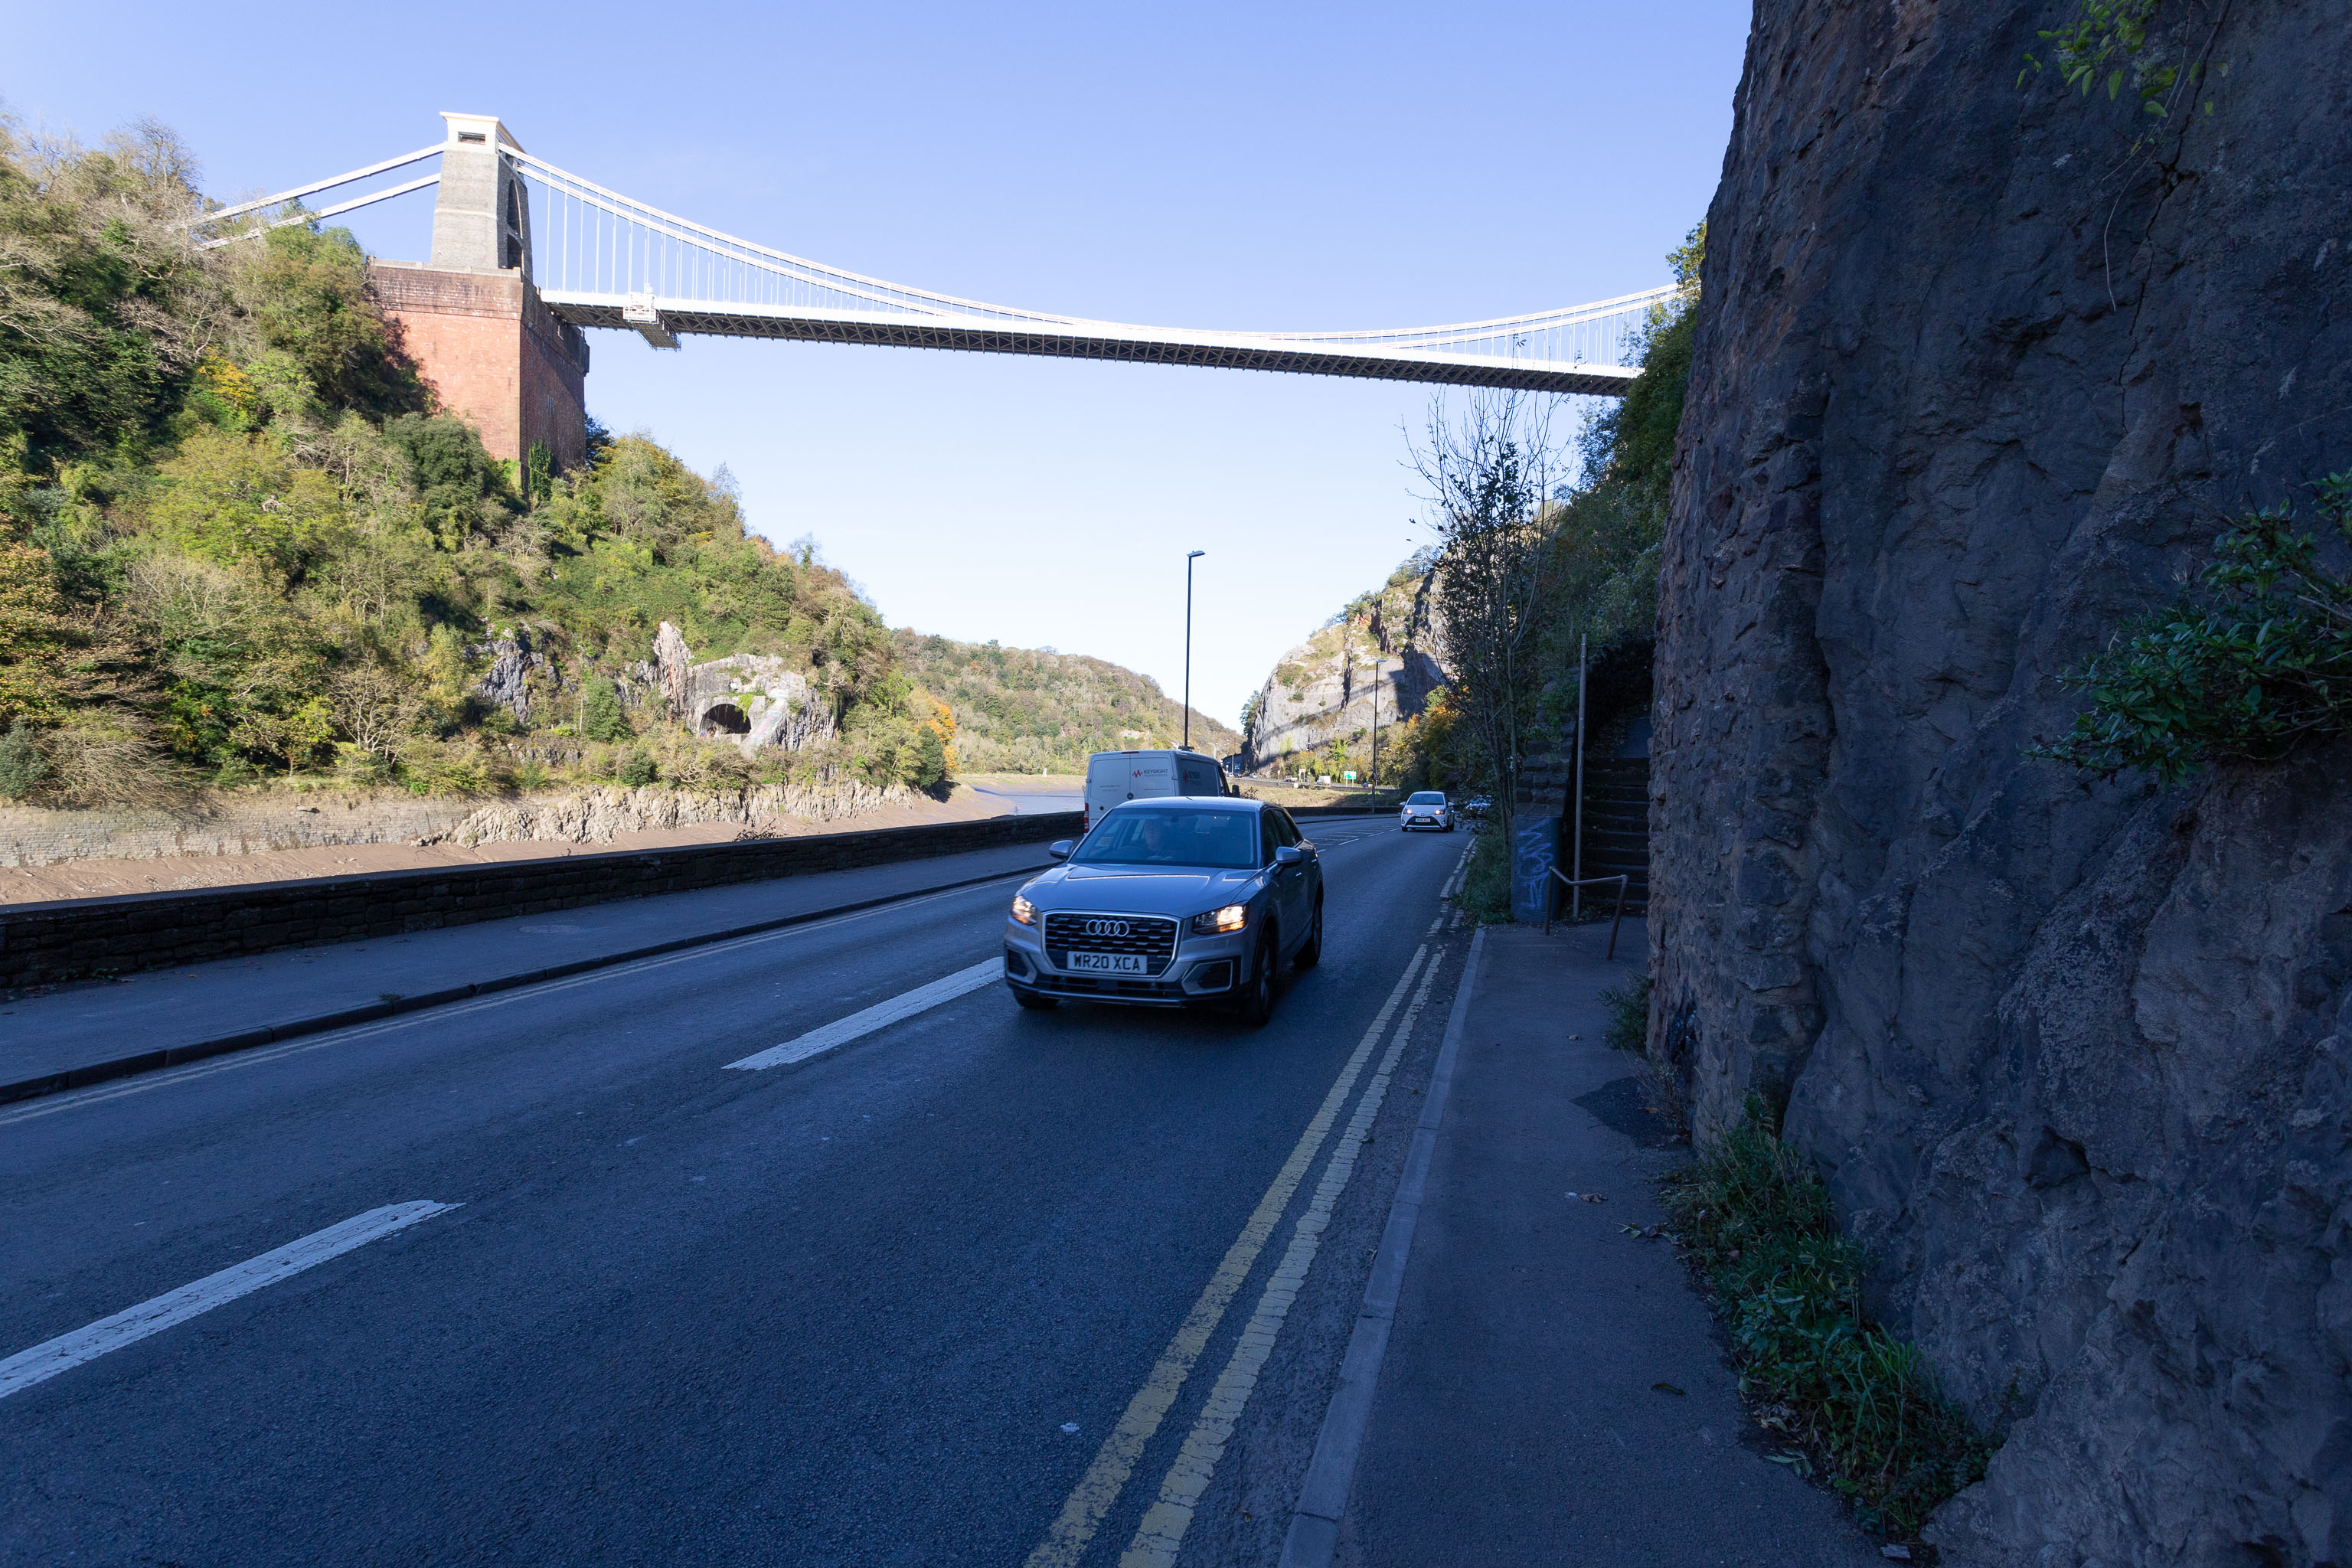 Hard to Cross
One of the many problems with the Hotwell Road and Portway is the complete dearth of places to safely cross this road, with a varying number of lan...